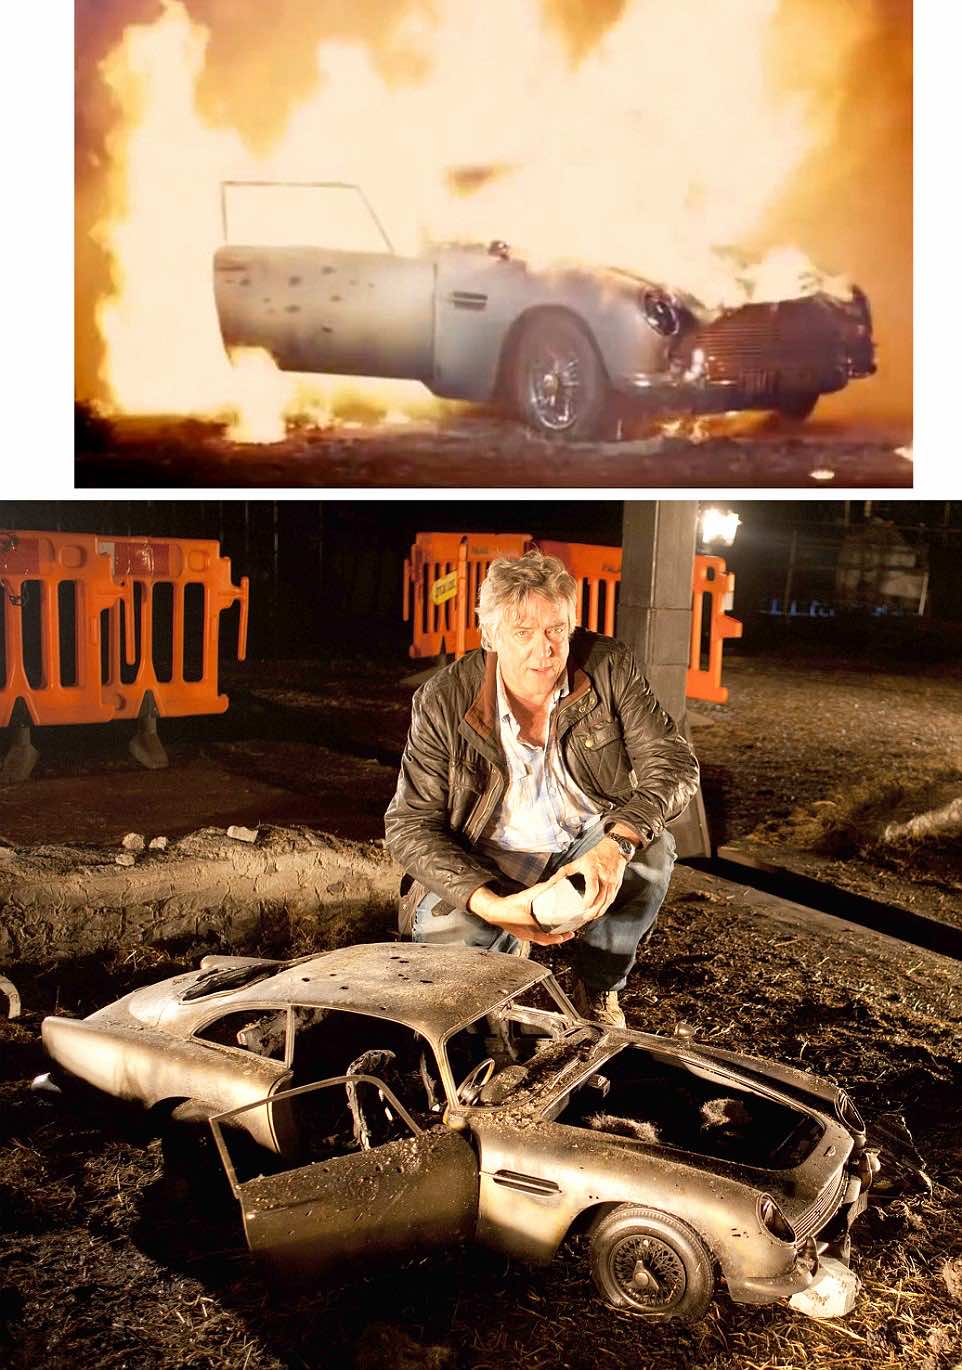 Steve Begg - Special Effects designer - with 3rd scale miniature Aston Martin DB5 and TOP the same model exploded for Skyfall (2012) - as the film sees an explosion destroy James Bond's prized Aston Martin DB5